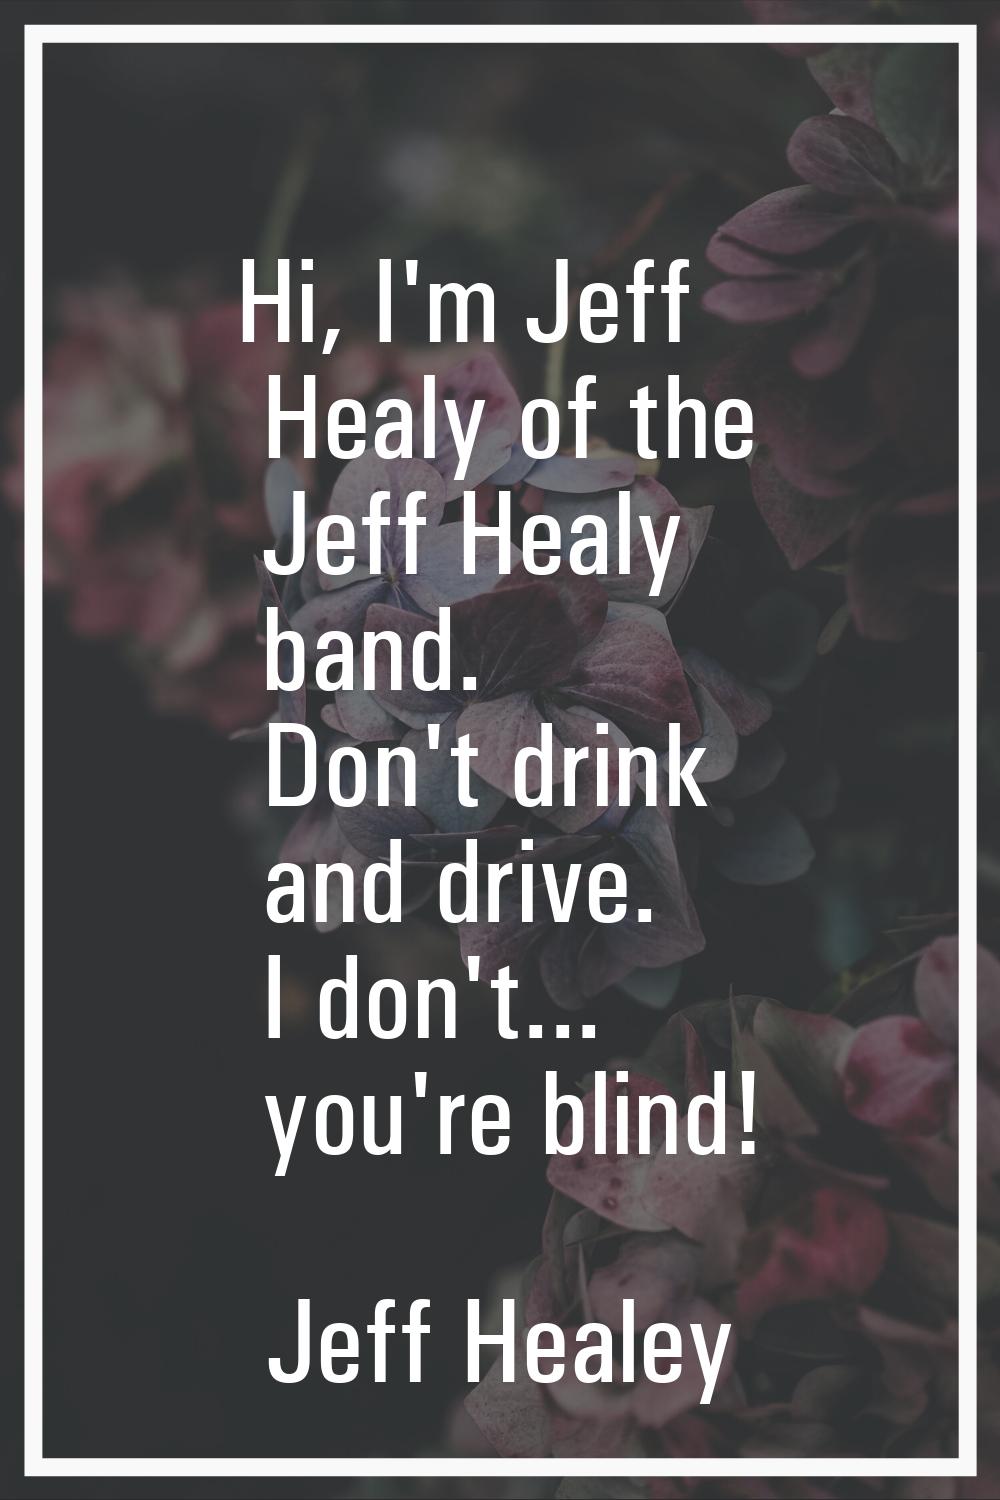 Hi, I'm Jeff Healy of the Jeff Healy band. Don't drink and drive. I don't... you're blind!